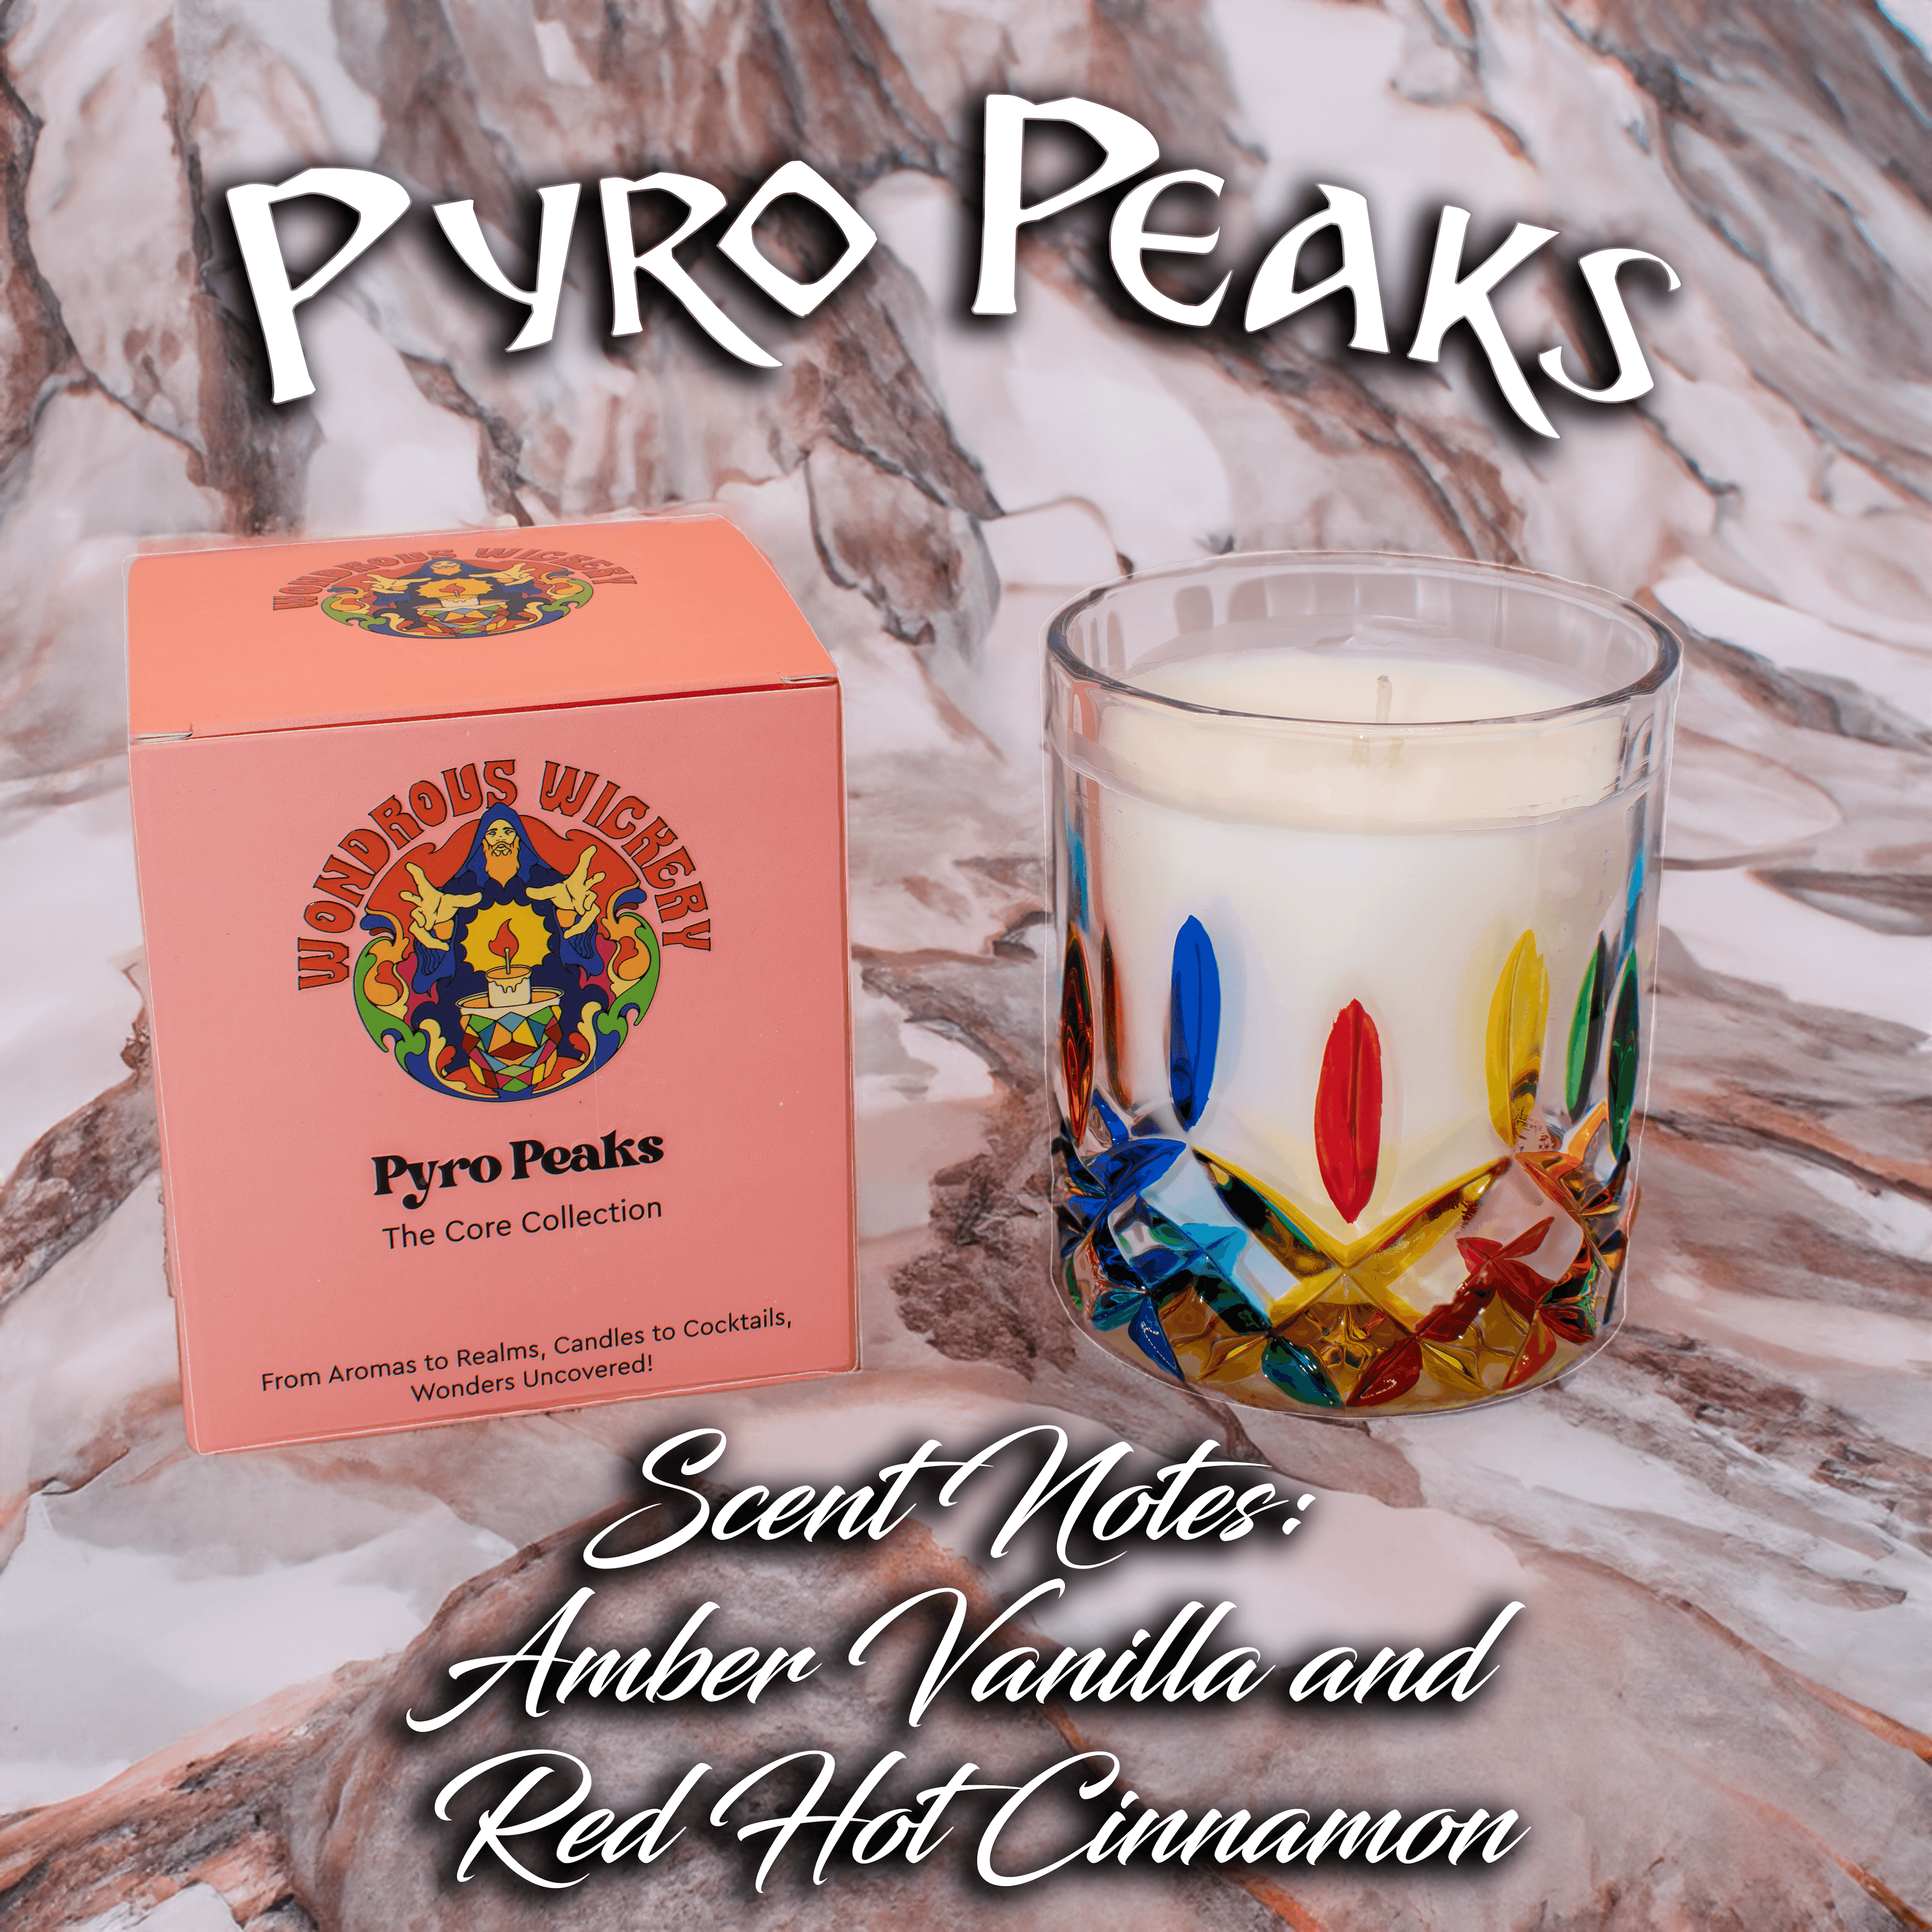 Pyro Peaks Candle / Candle to Cocktail Experience / Core Collection / Hand Crafted / Unique Candle Gift - undefined - Wondrous Wickery